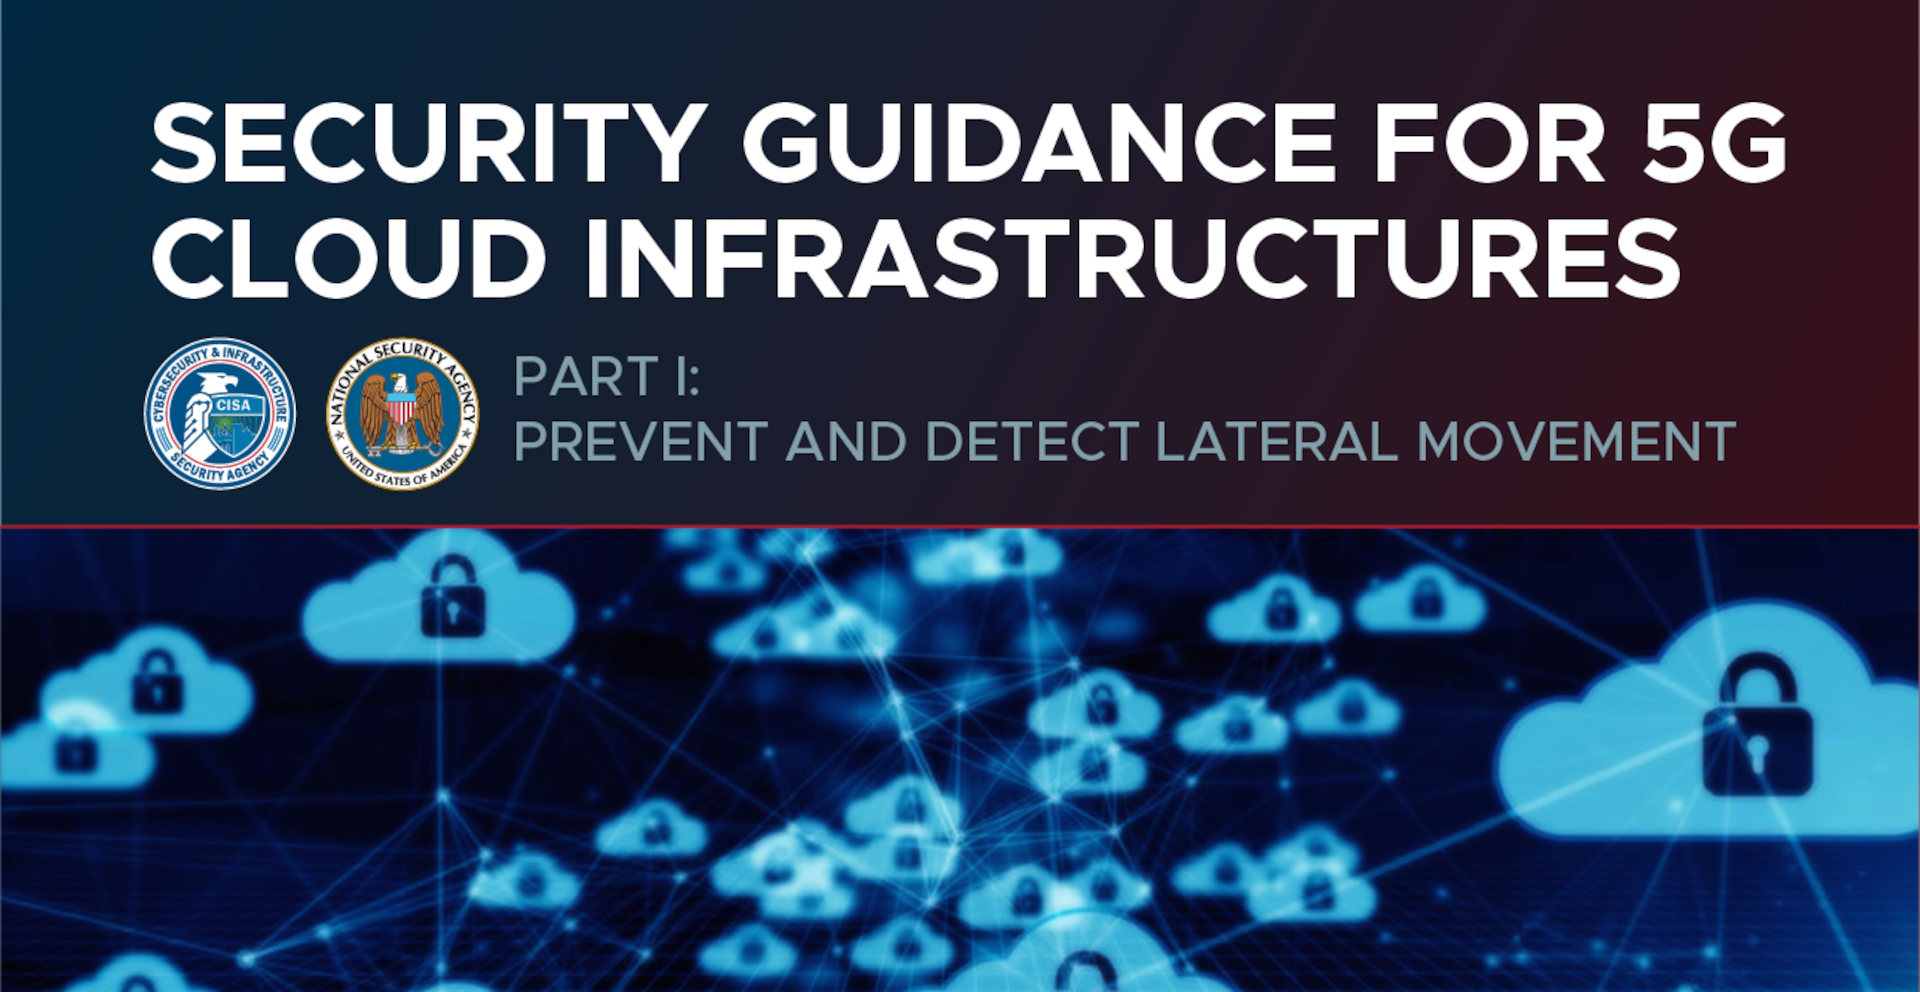 Security Guidance for 5G Cloud Infrastructures